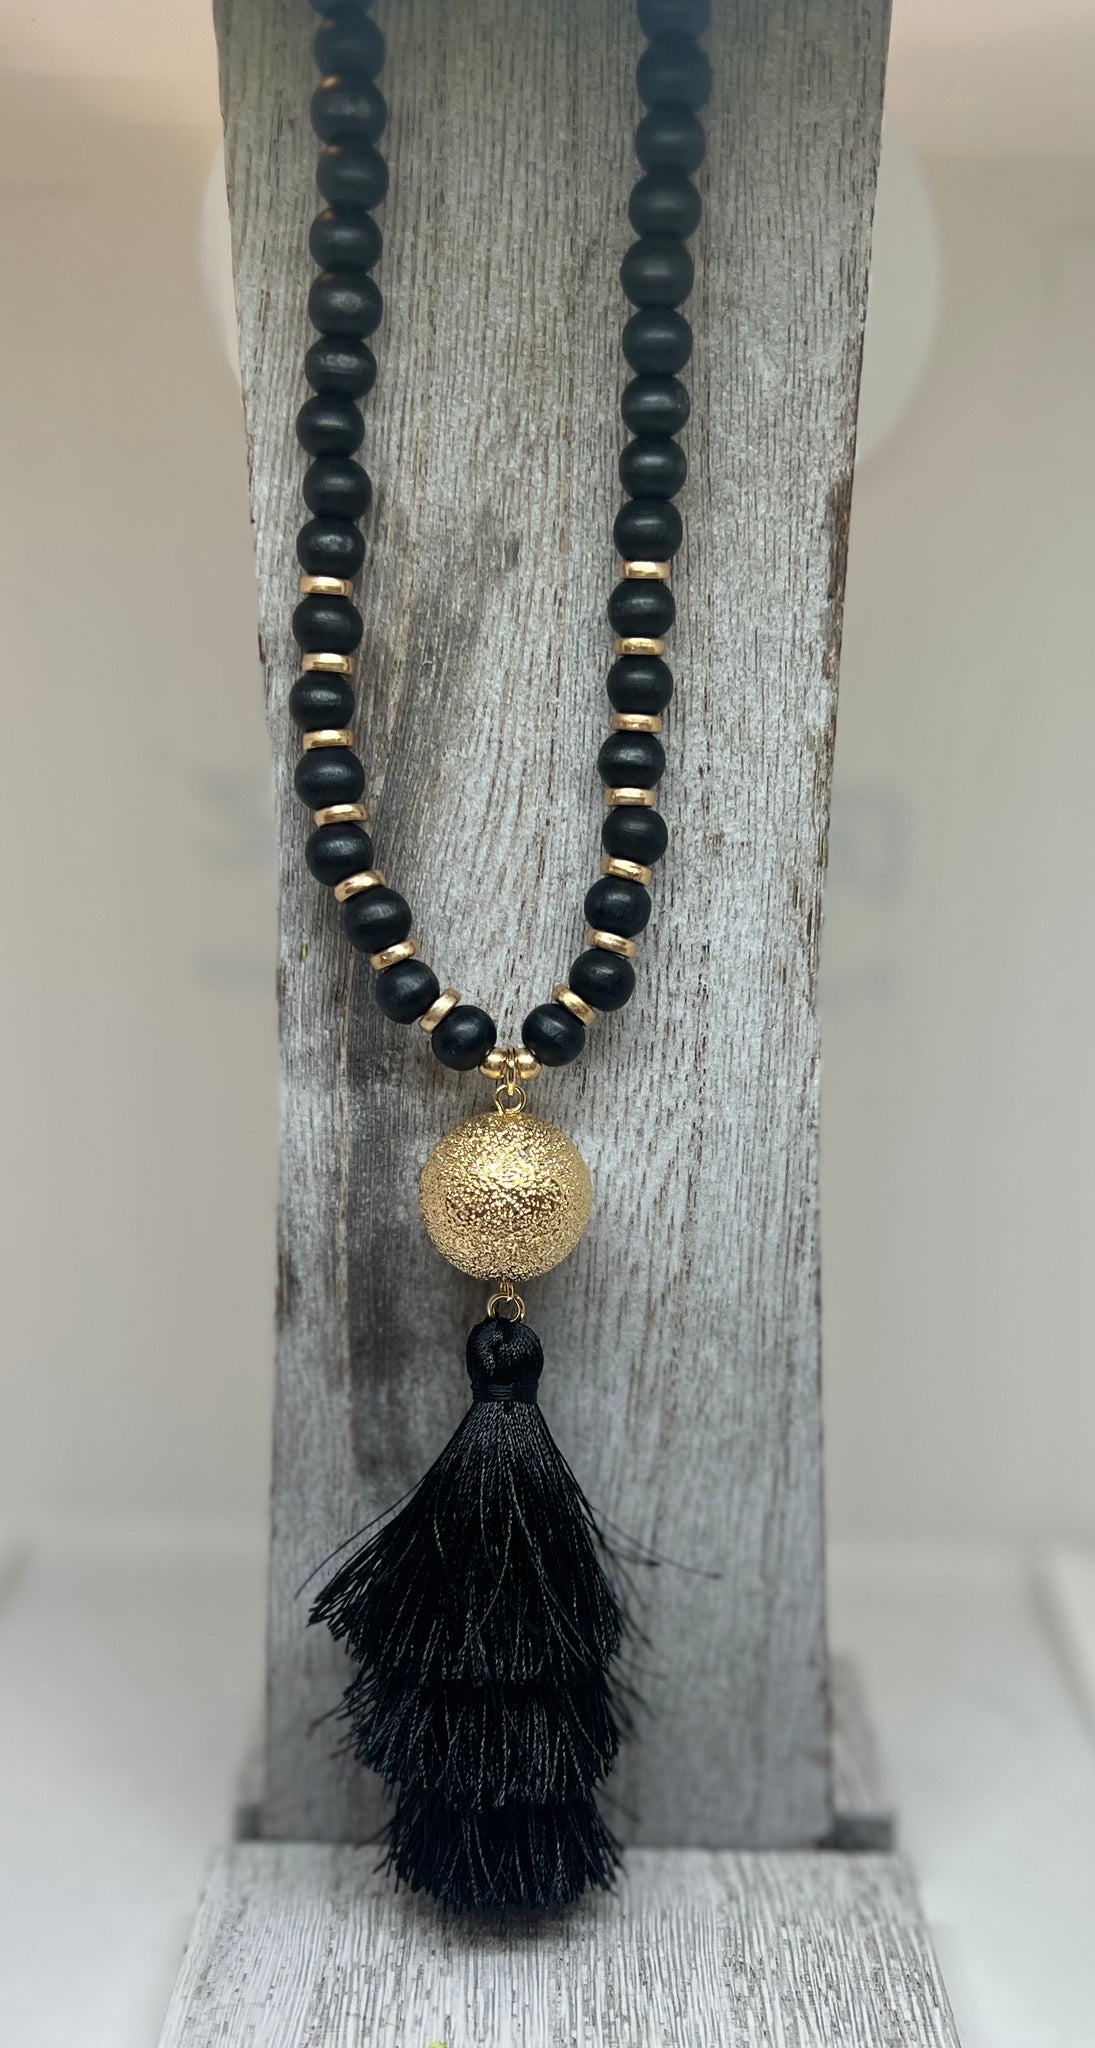 Black Bead Black Tassel with Gold Ball Necklace